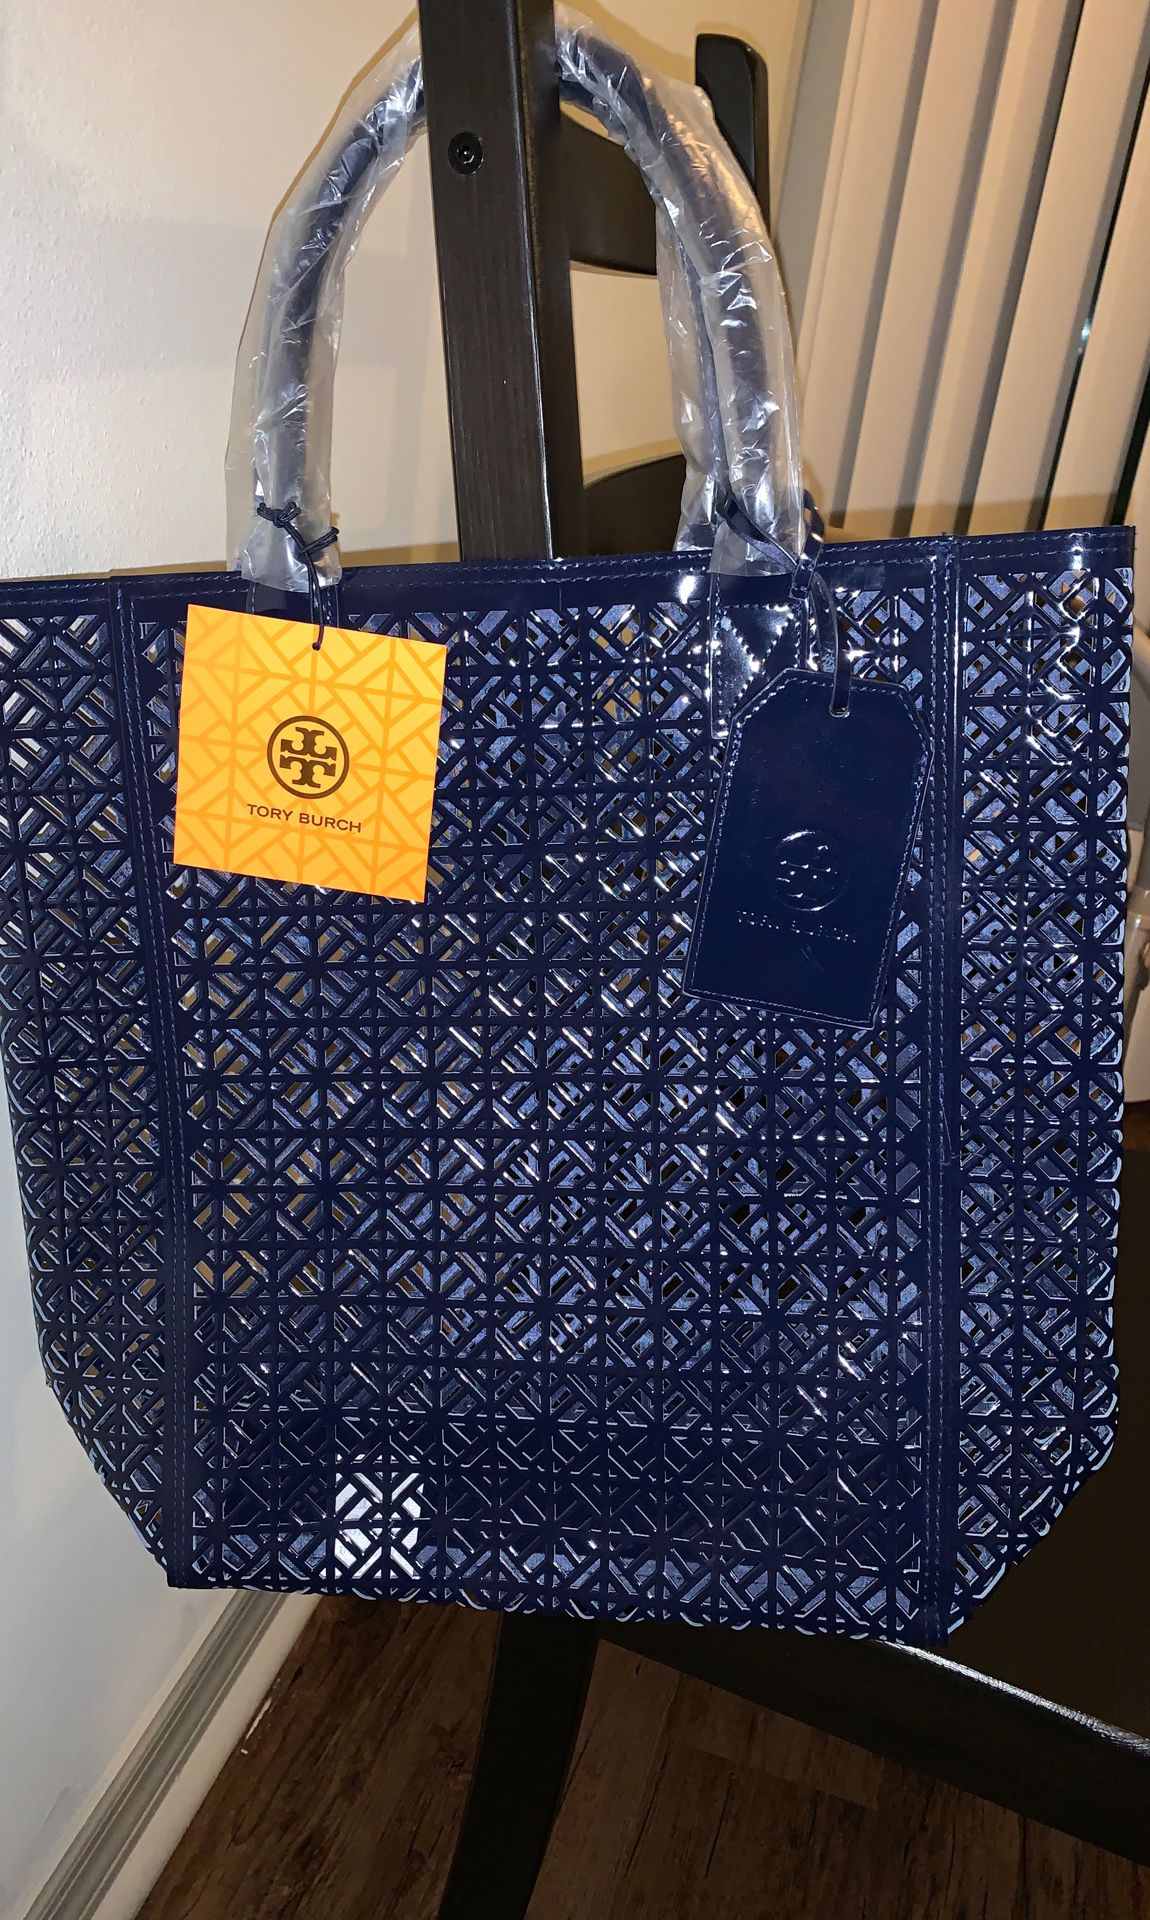 Tory Burch navy blue tote bag for Sale in Biscayne Park, FL - OfferUp